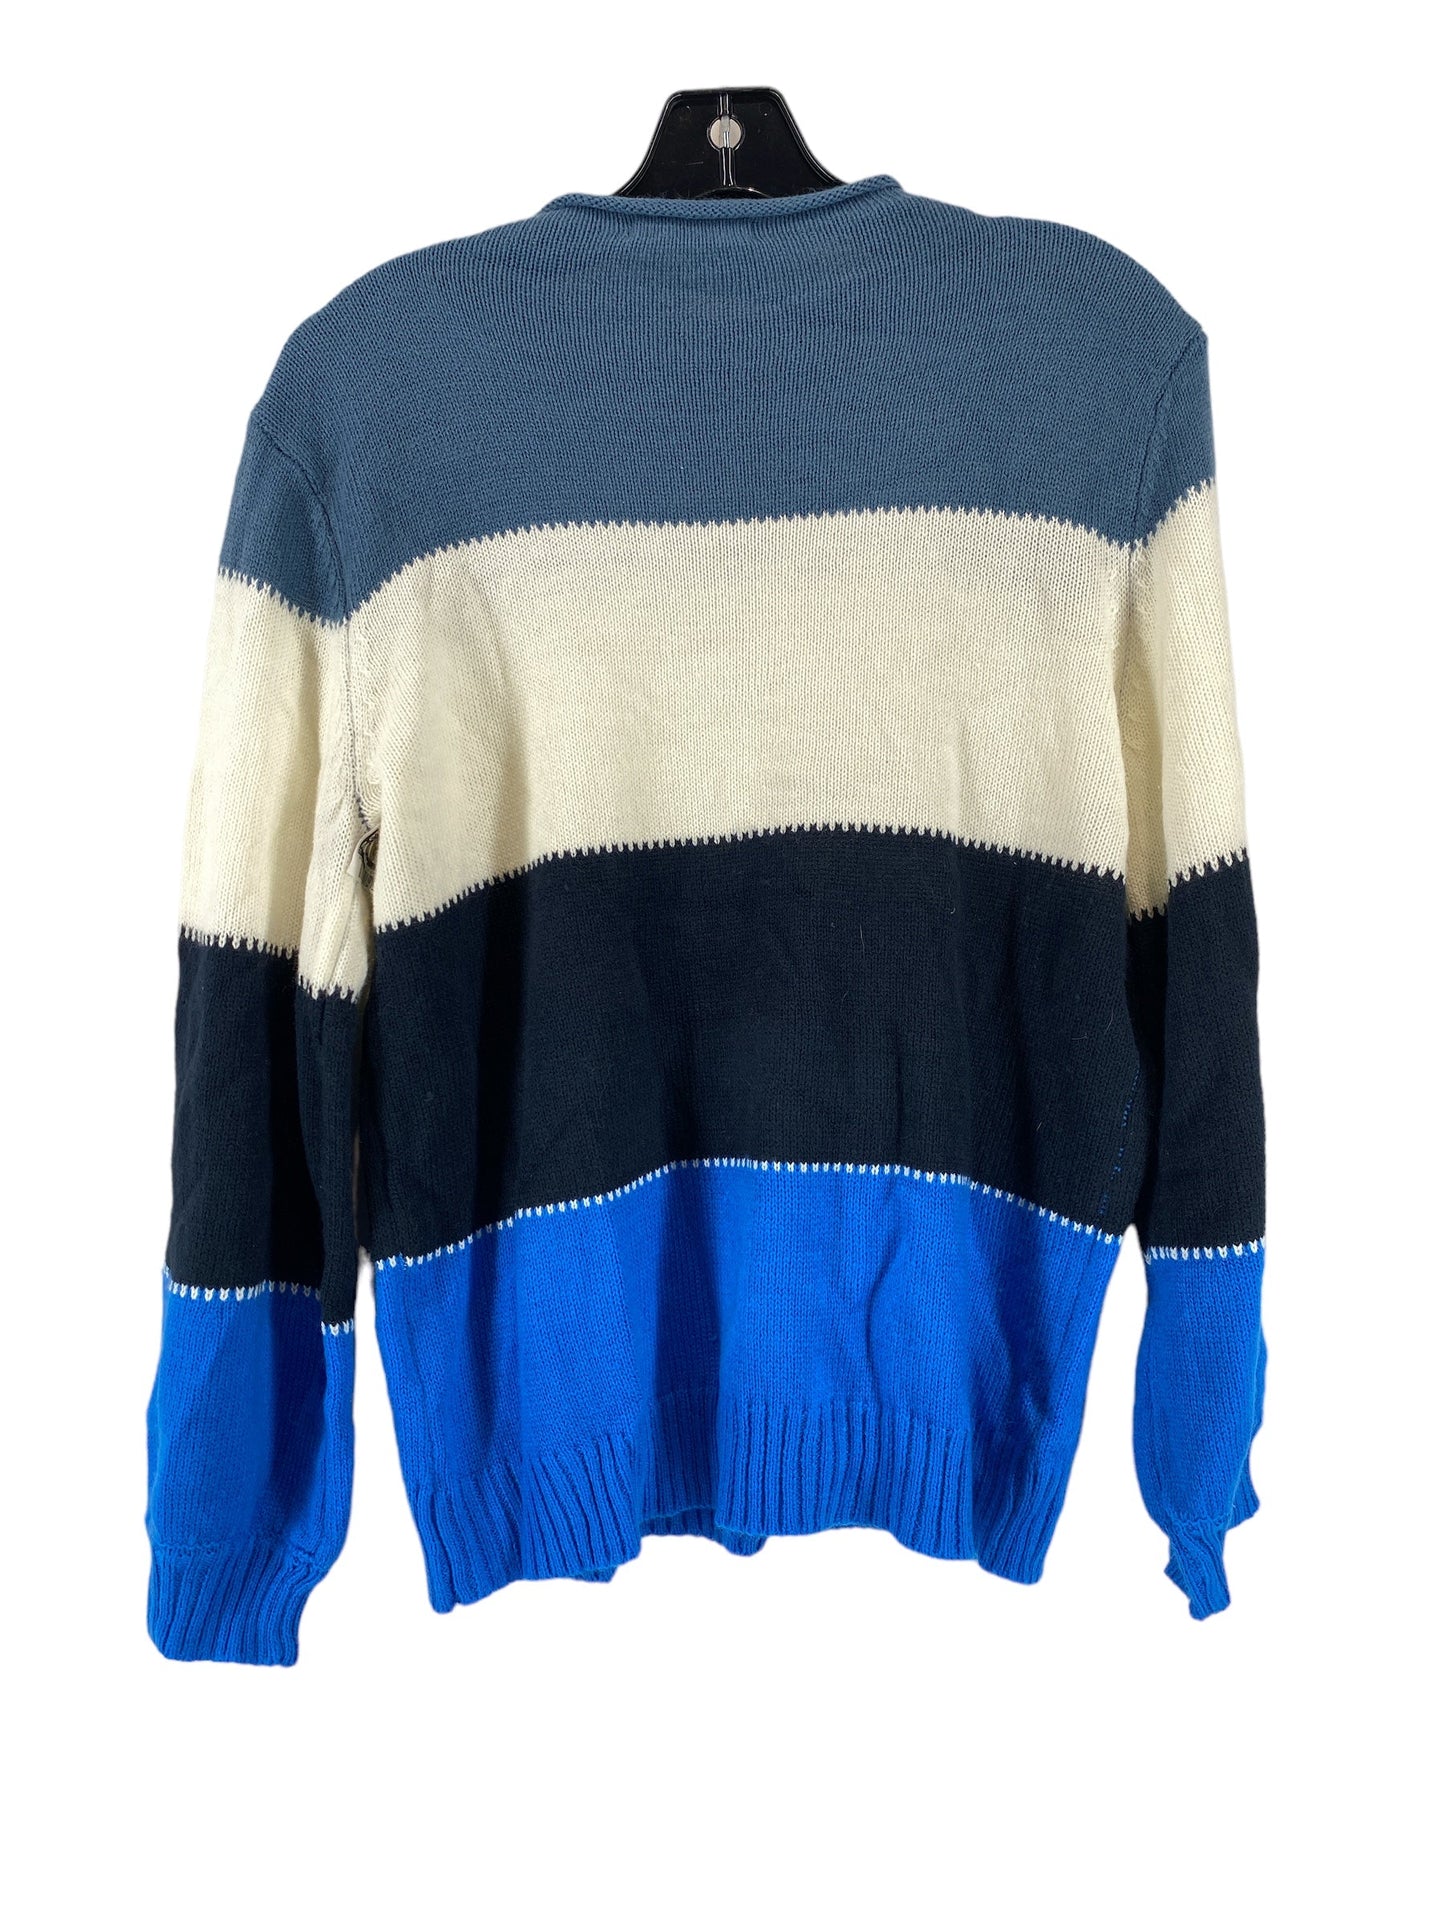 Sweater By Misslook  Size: L